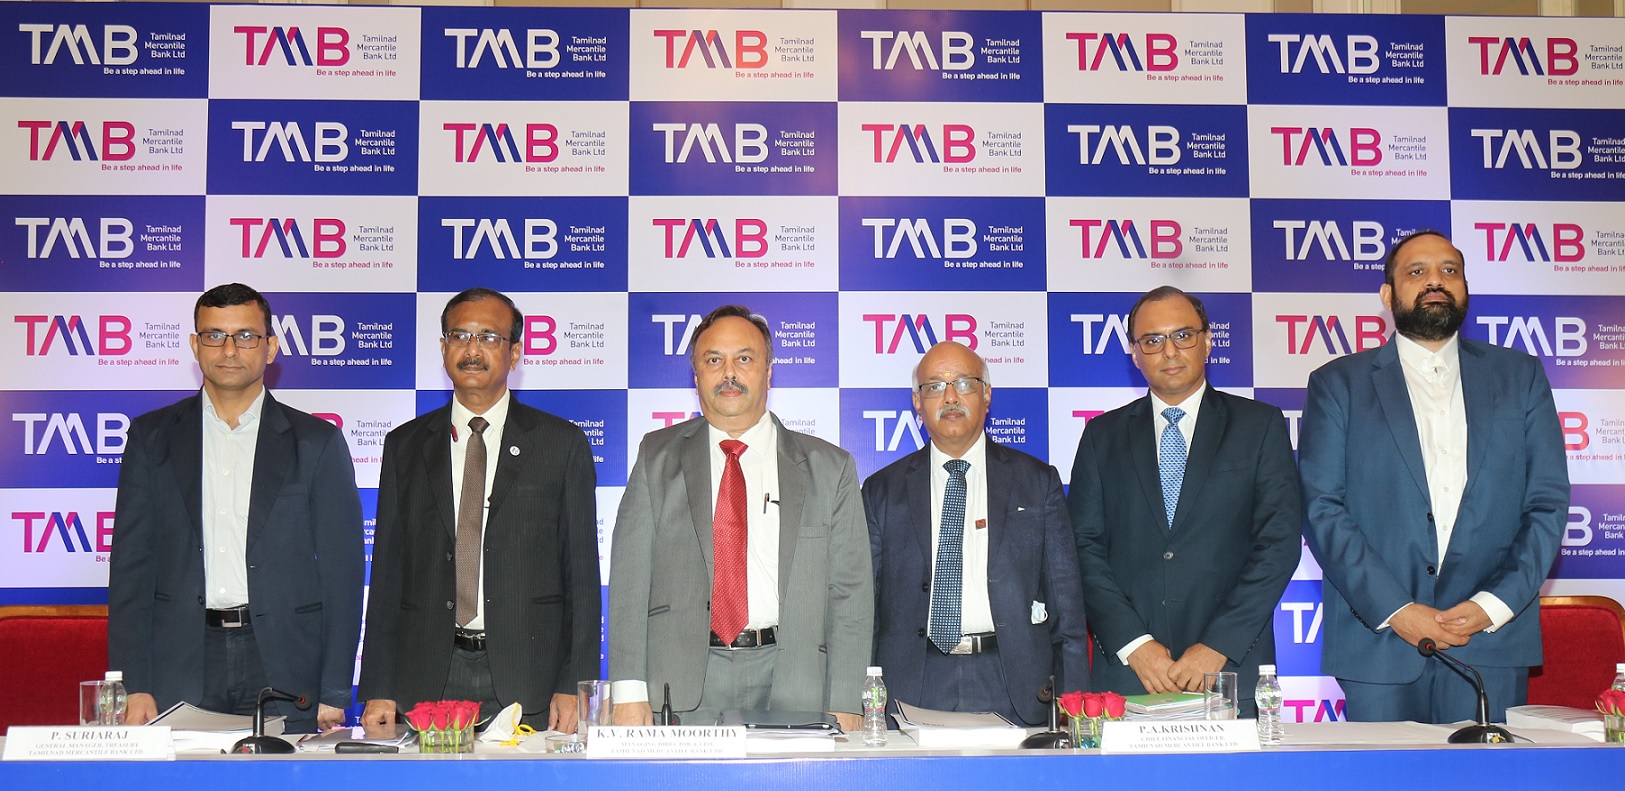 tamilnad-mercantilebank-limited-initial-public-offering-to-open-on-september-05-2022